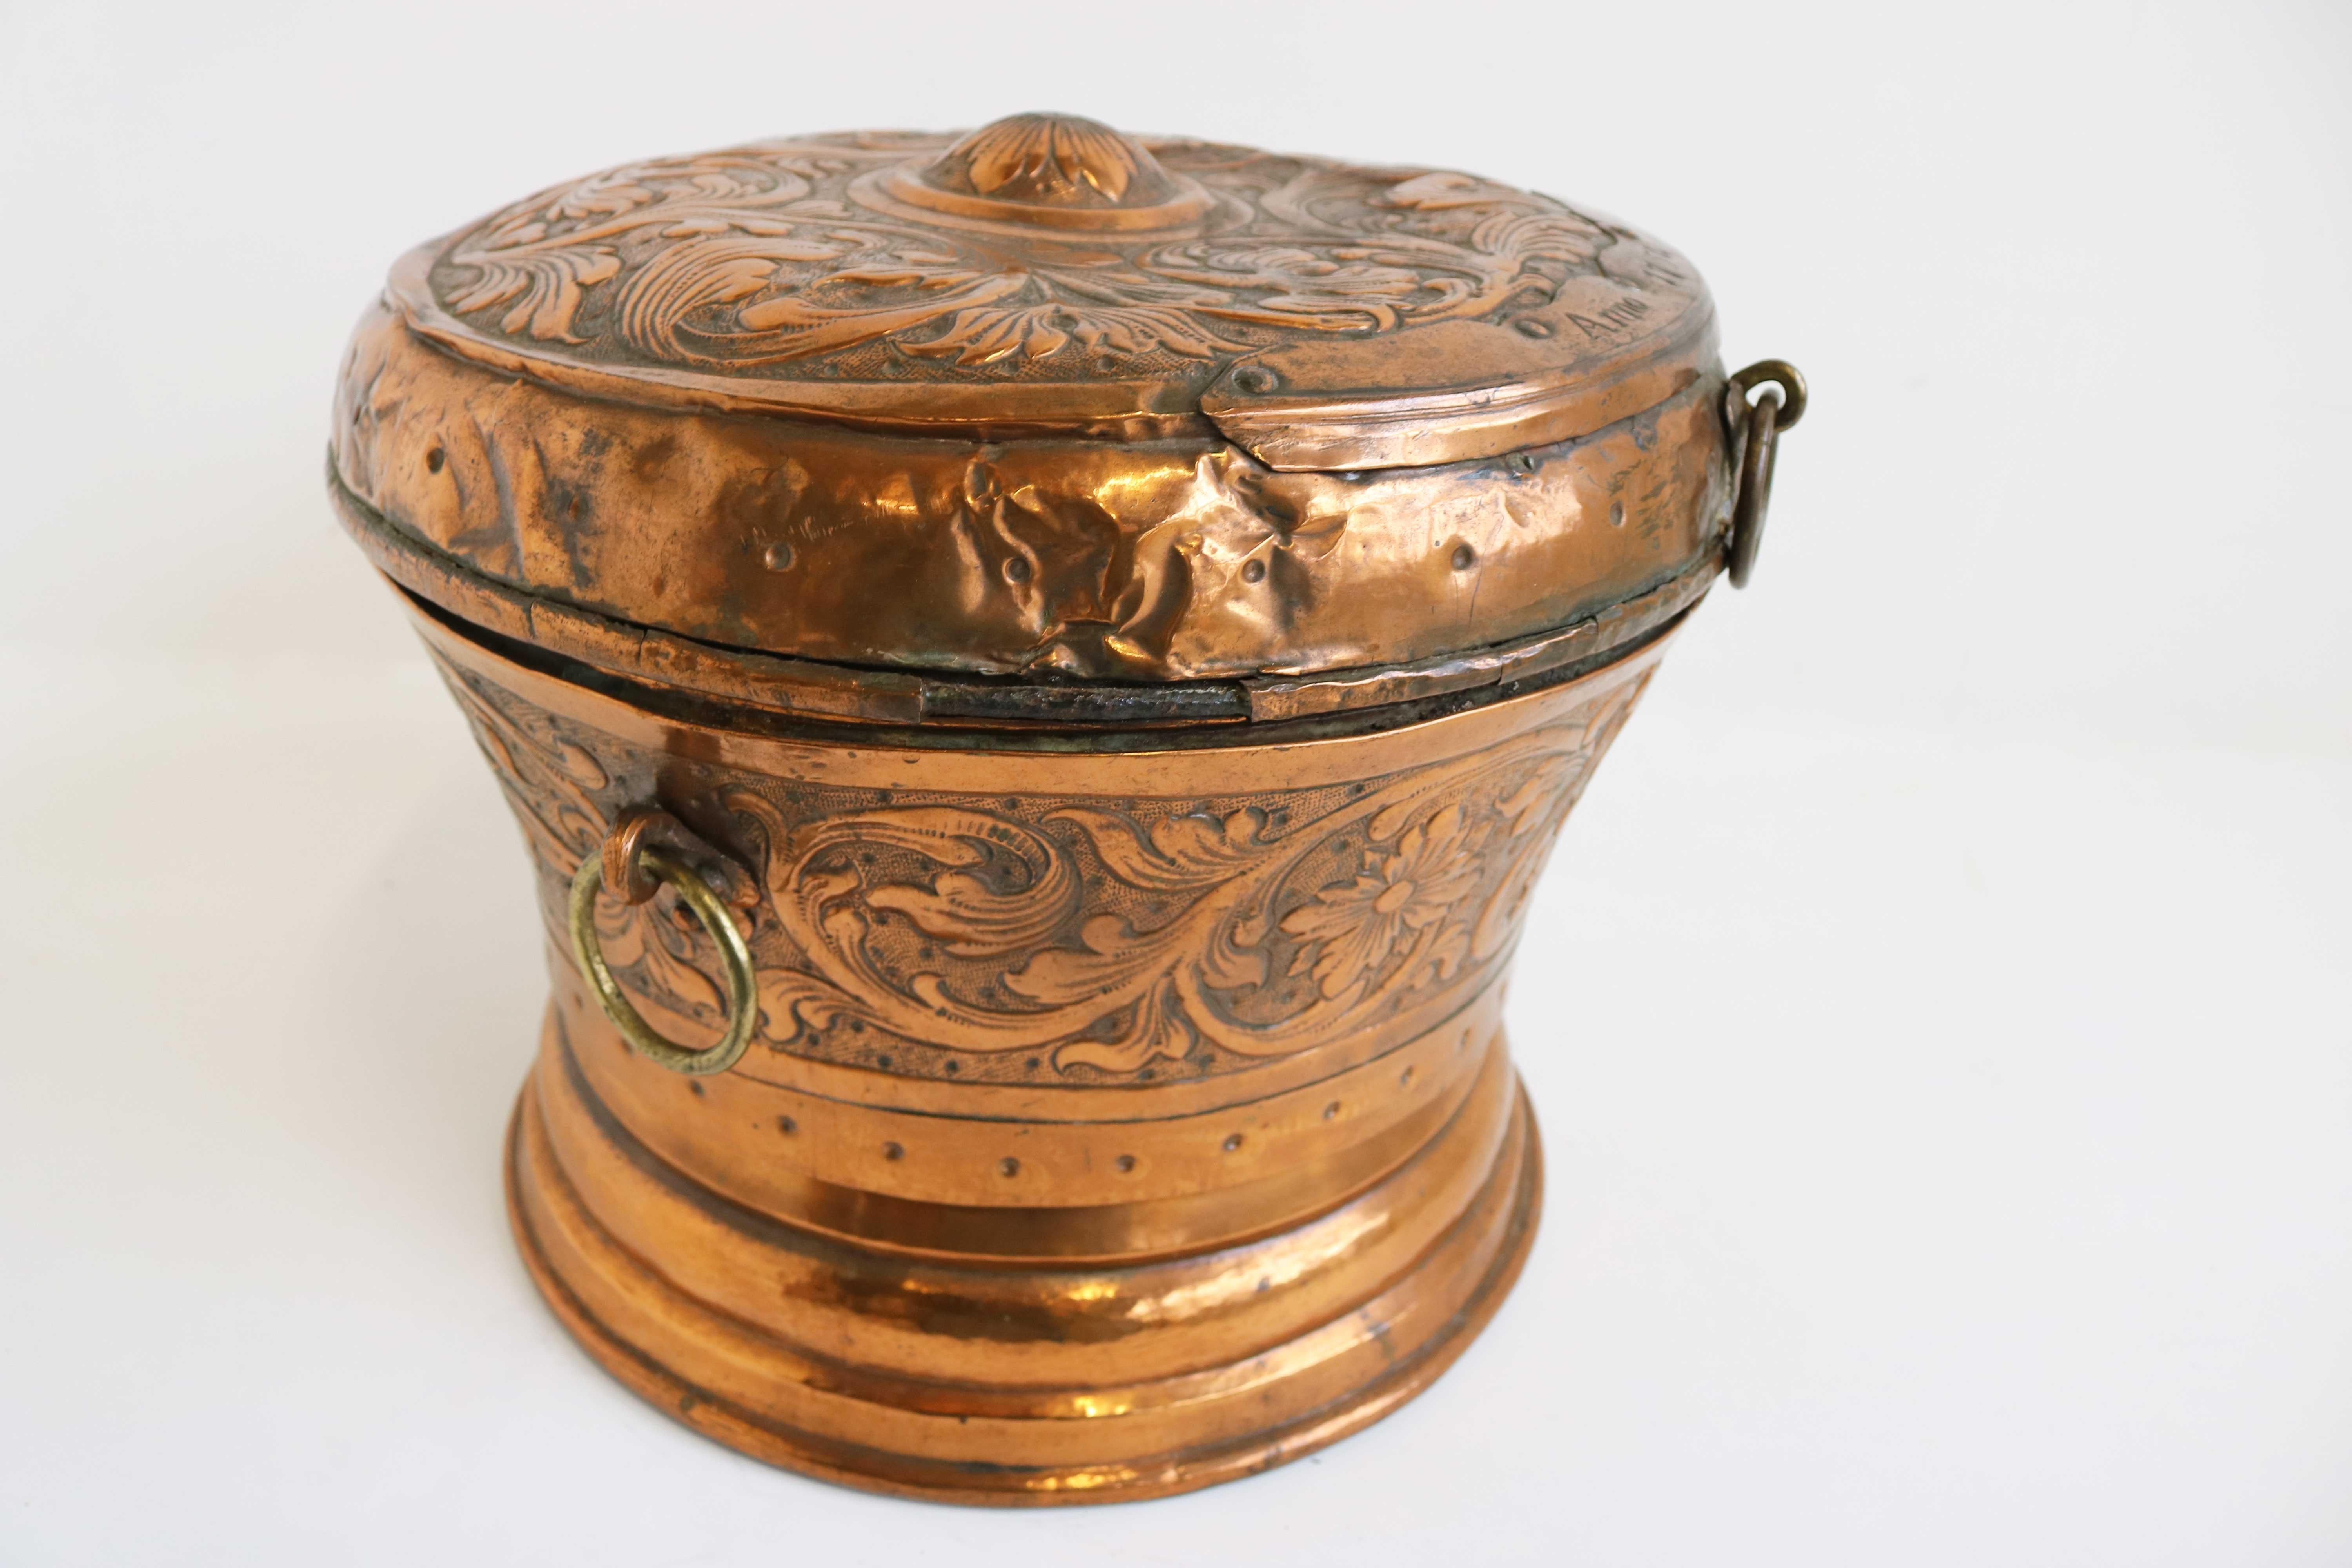 Decorated Dutch Antique Copper Bowl / Pot with Lid, 18th Century, Dated 1750 For Sale 8